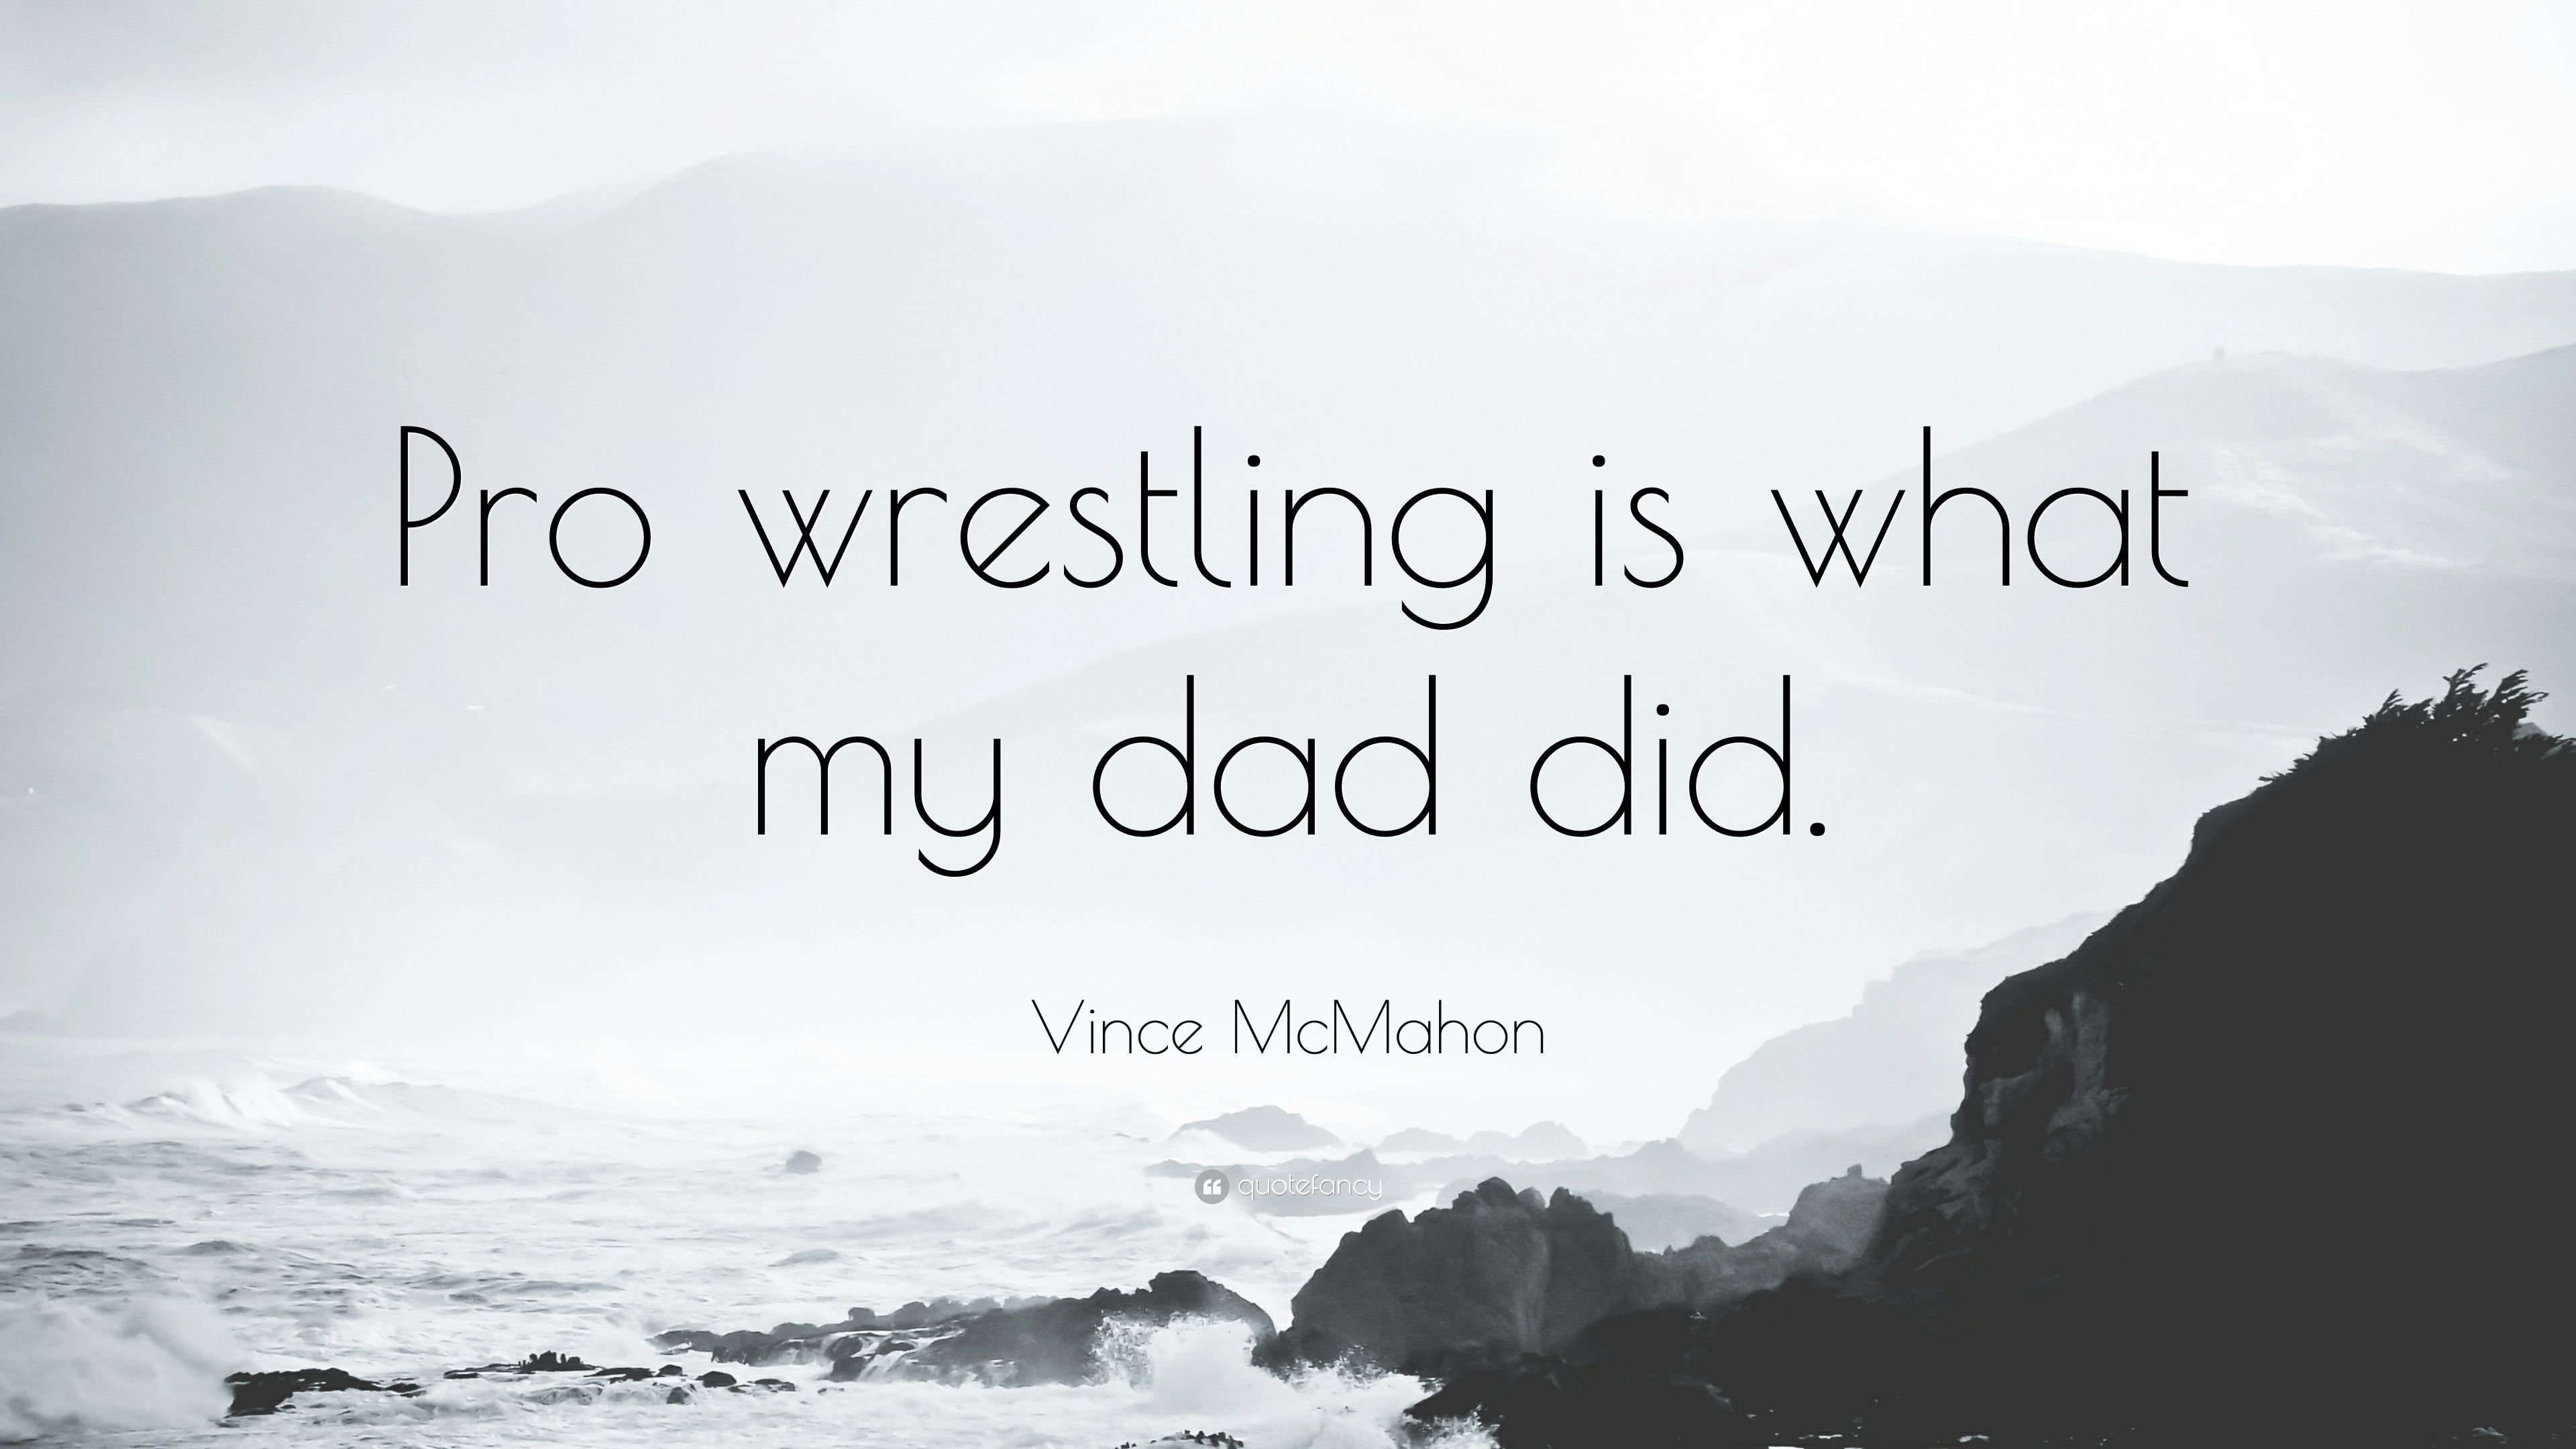 Vince McMahon Quote: “Pro wrestling is what my dad did.” 7